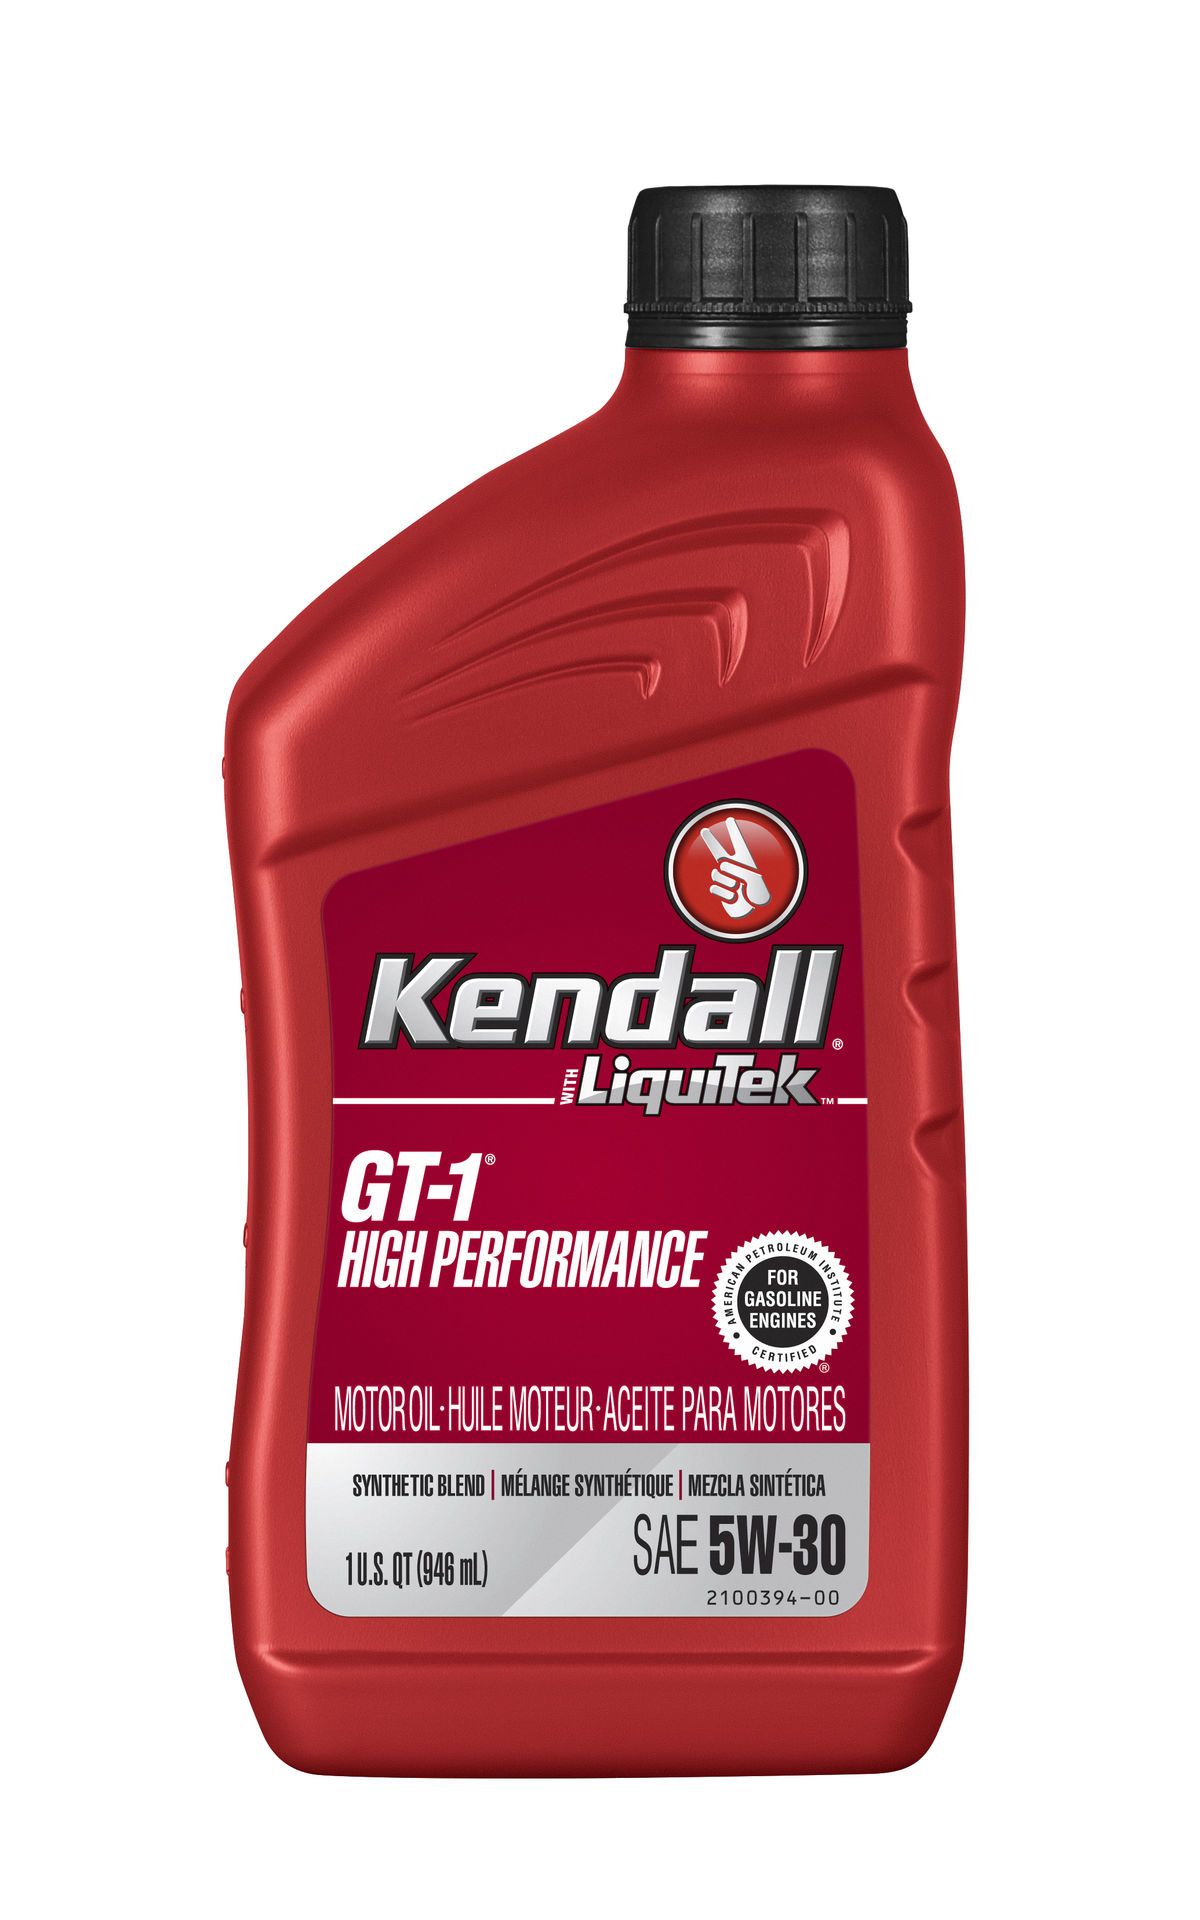 Buy Kendall Synthetic Blend 5W30 Motor 12/1 Qts. Online - Yoder Oil